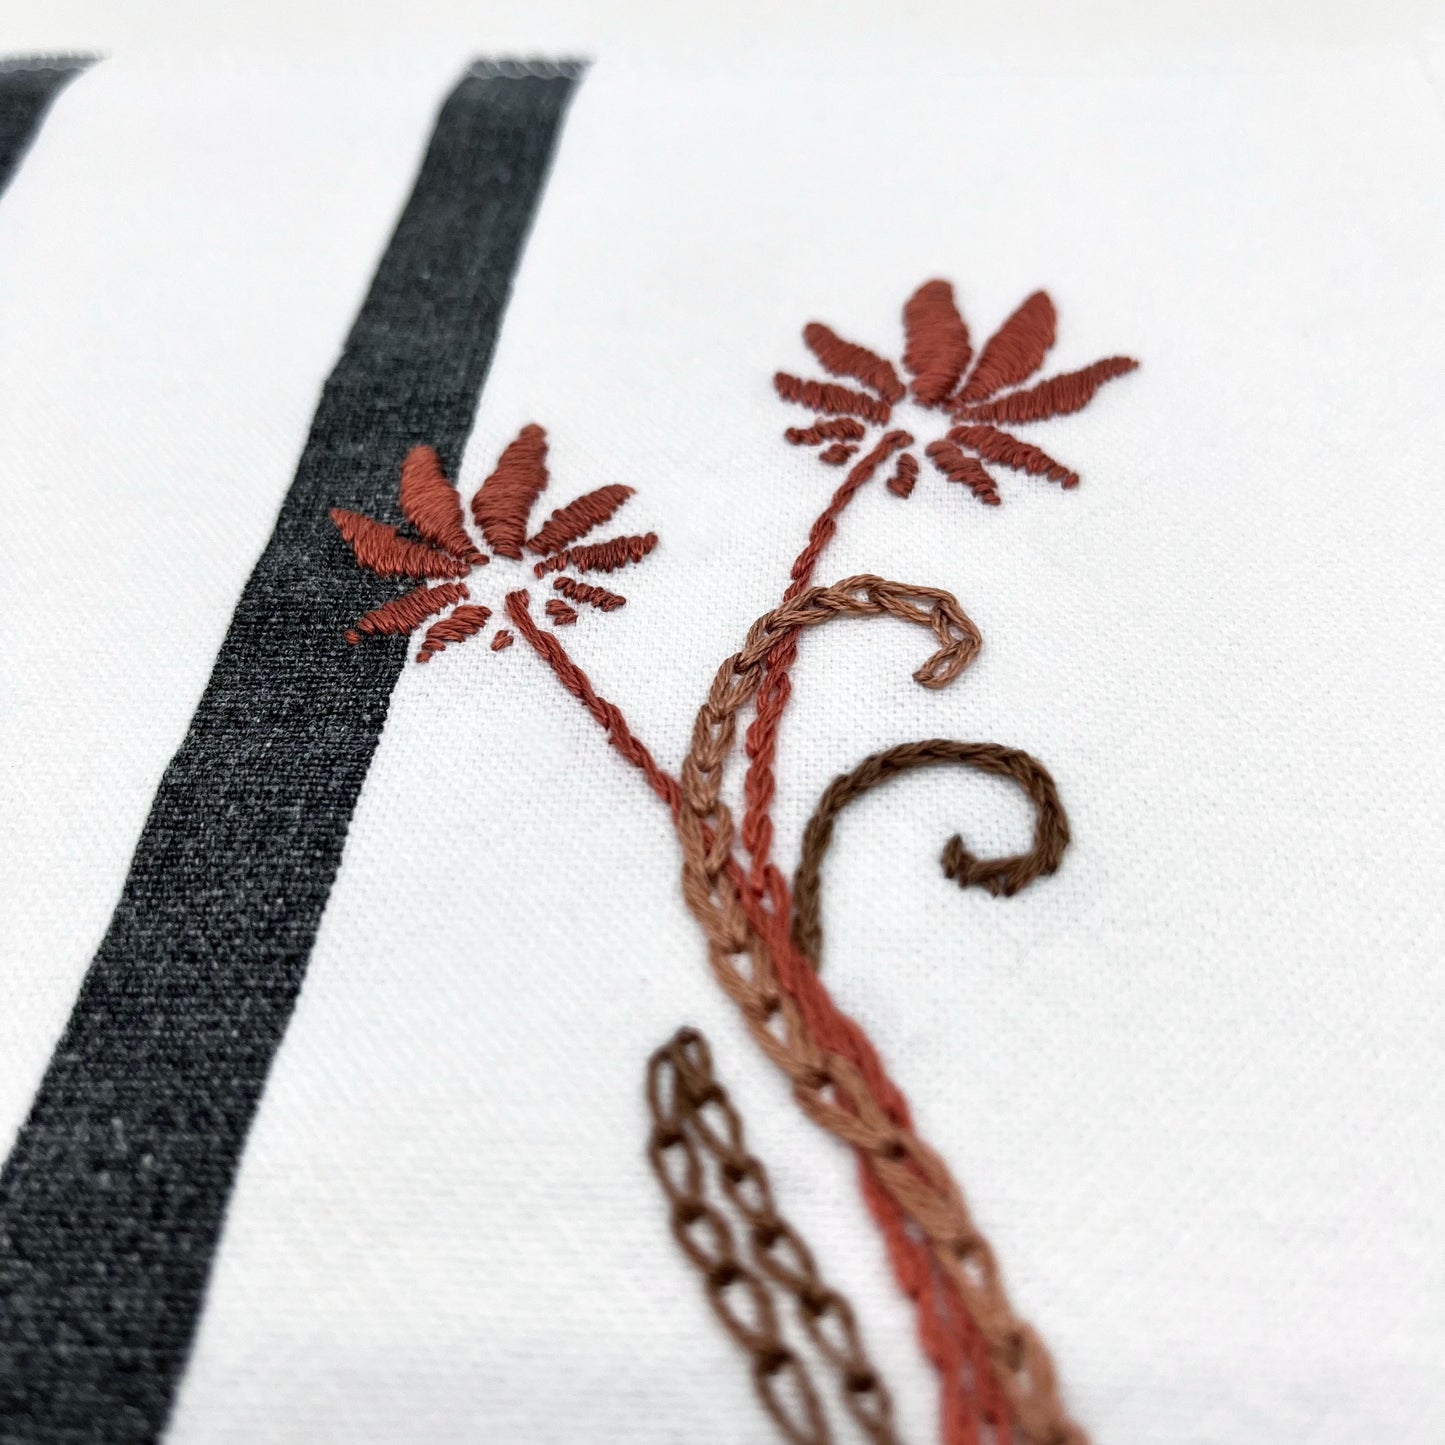 close up angled view of a fabric wall hanging made out of white fabric with black vertical stripes, hand stitched with flowers in shades of mauve with long curvy stems in chainstitch, backstitch and stem stitch, on a white background